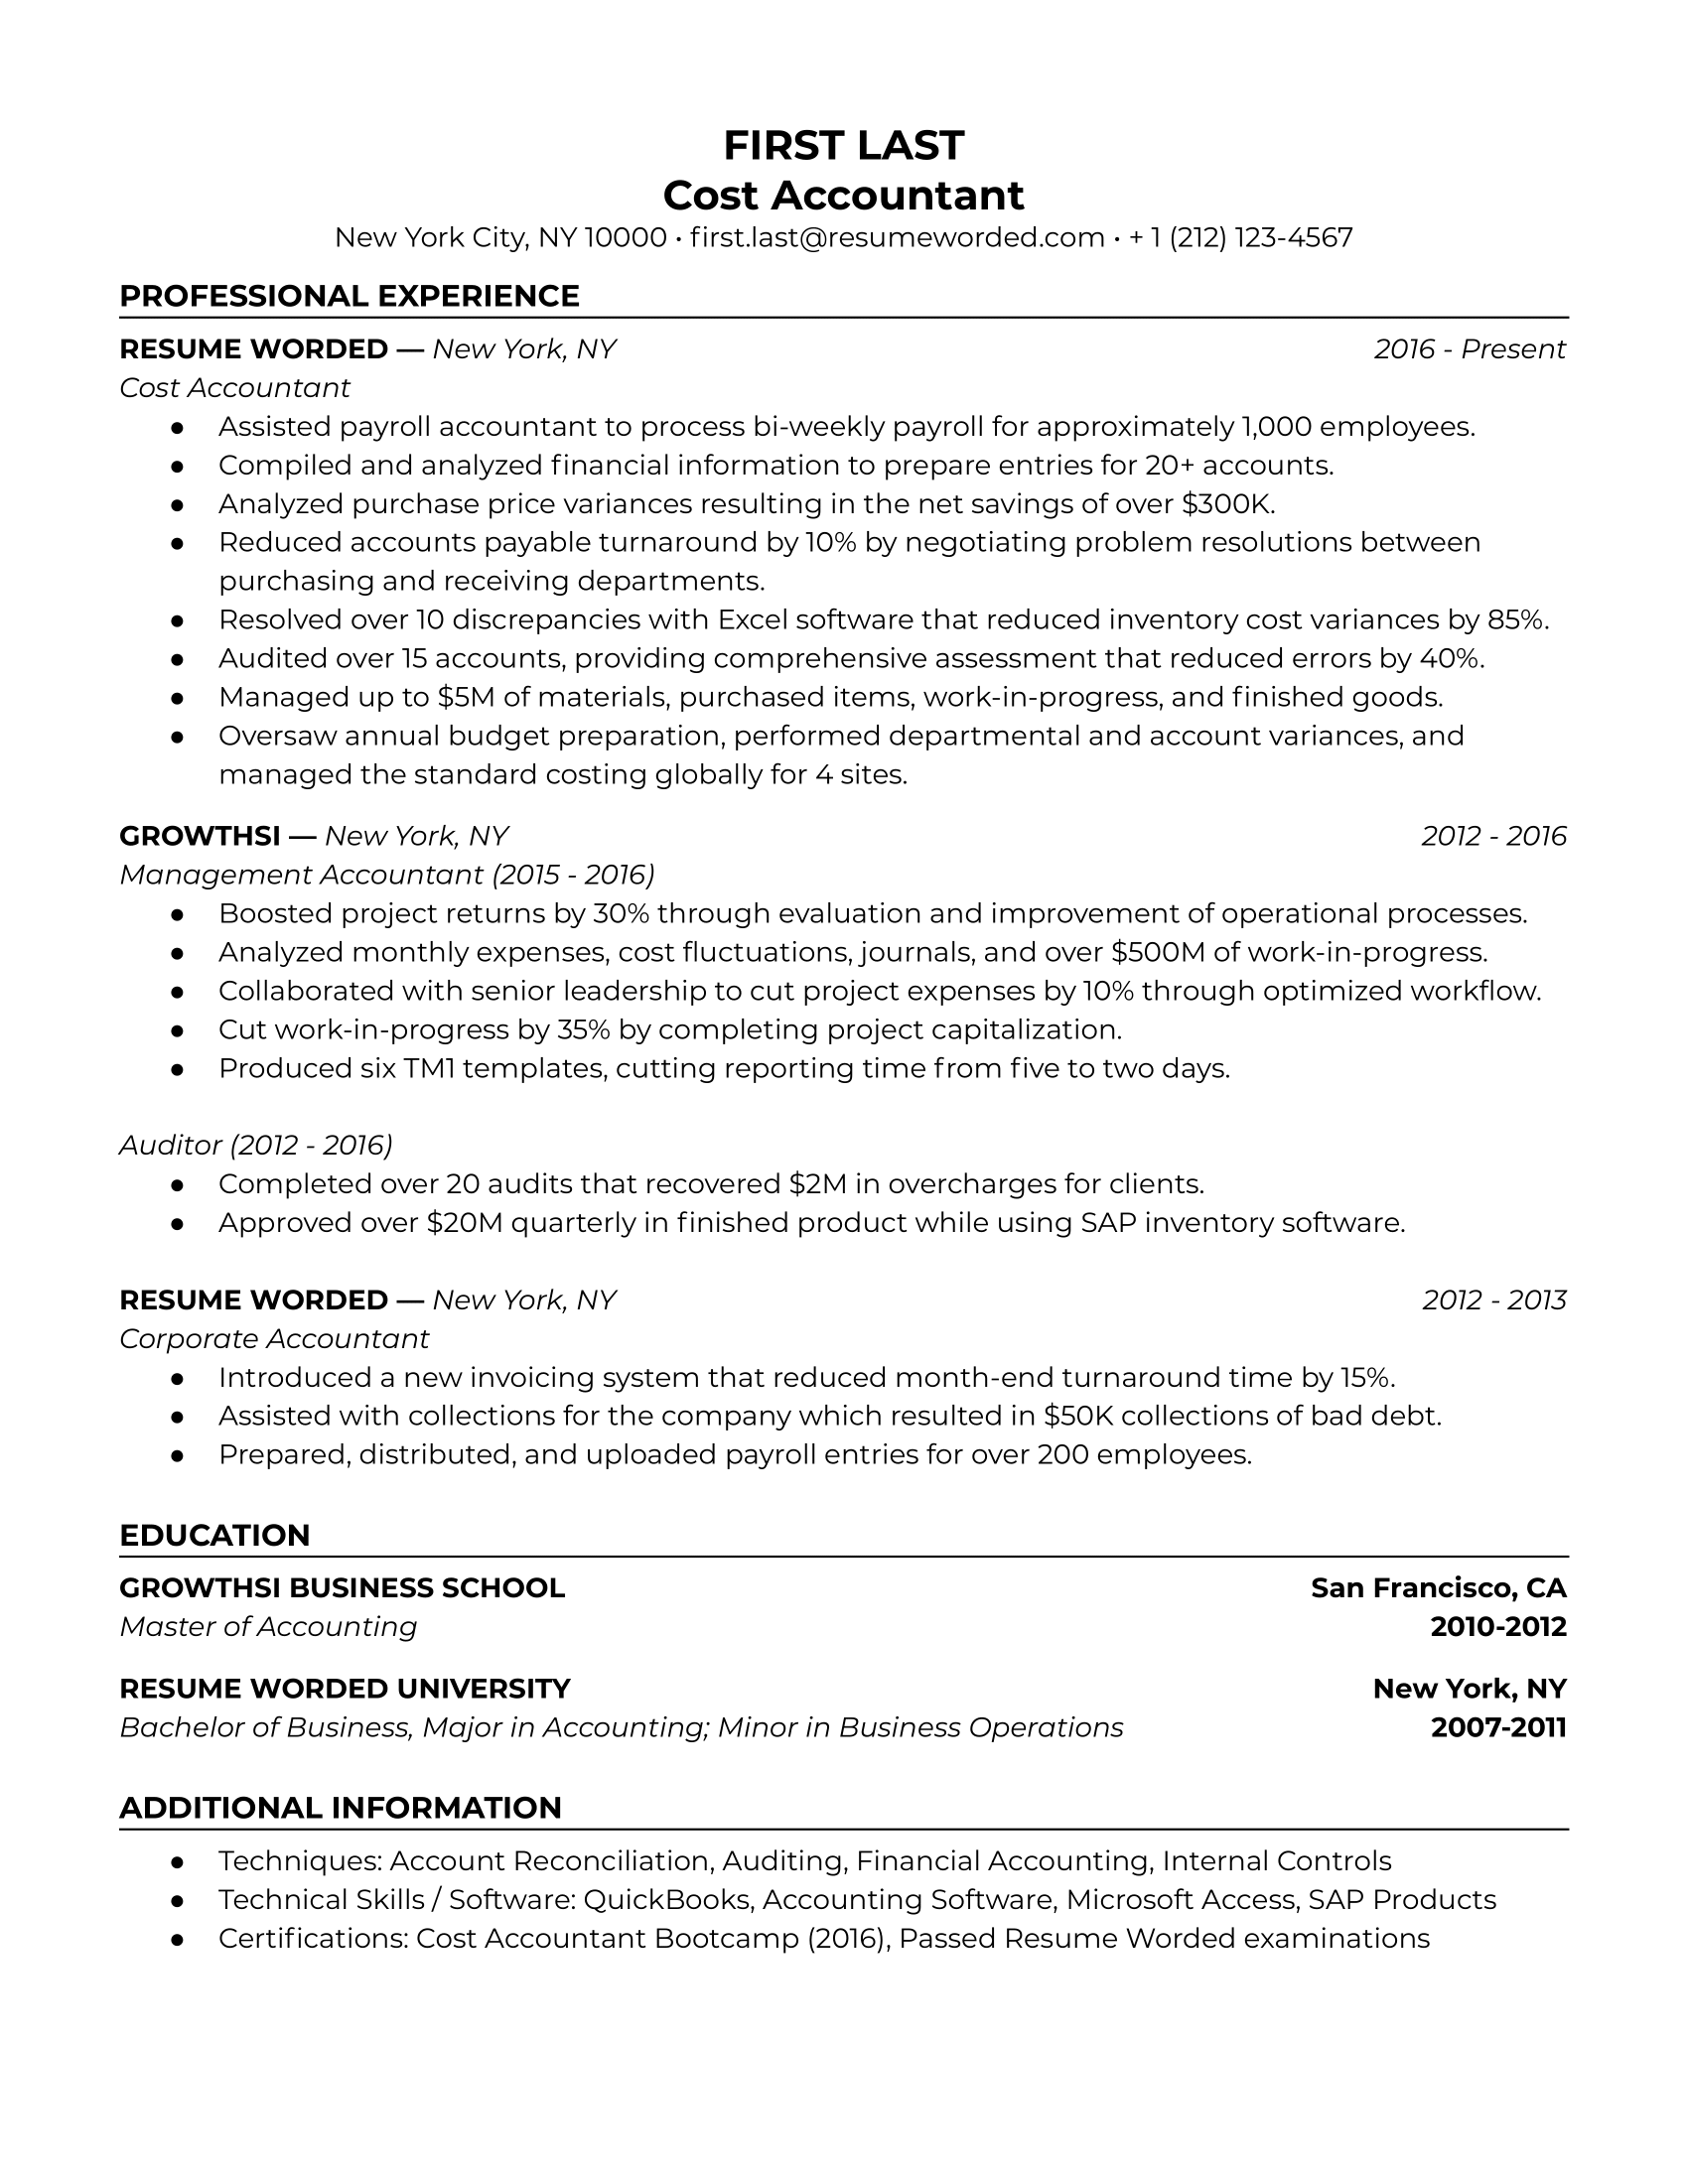 Cost Accountant Resume Template + Example